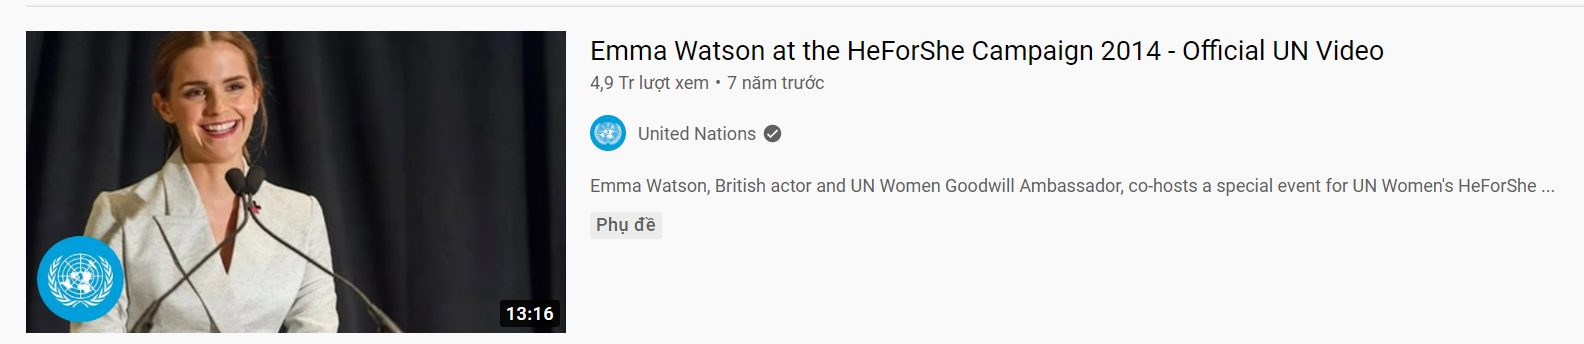 Video Emma Watson at the heforshe campaign 2014